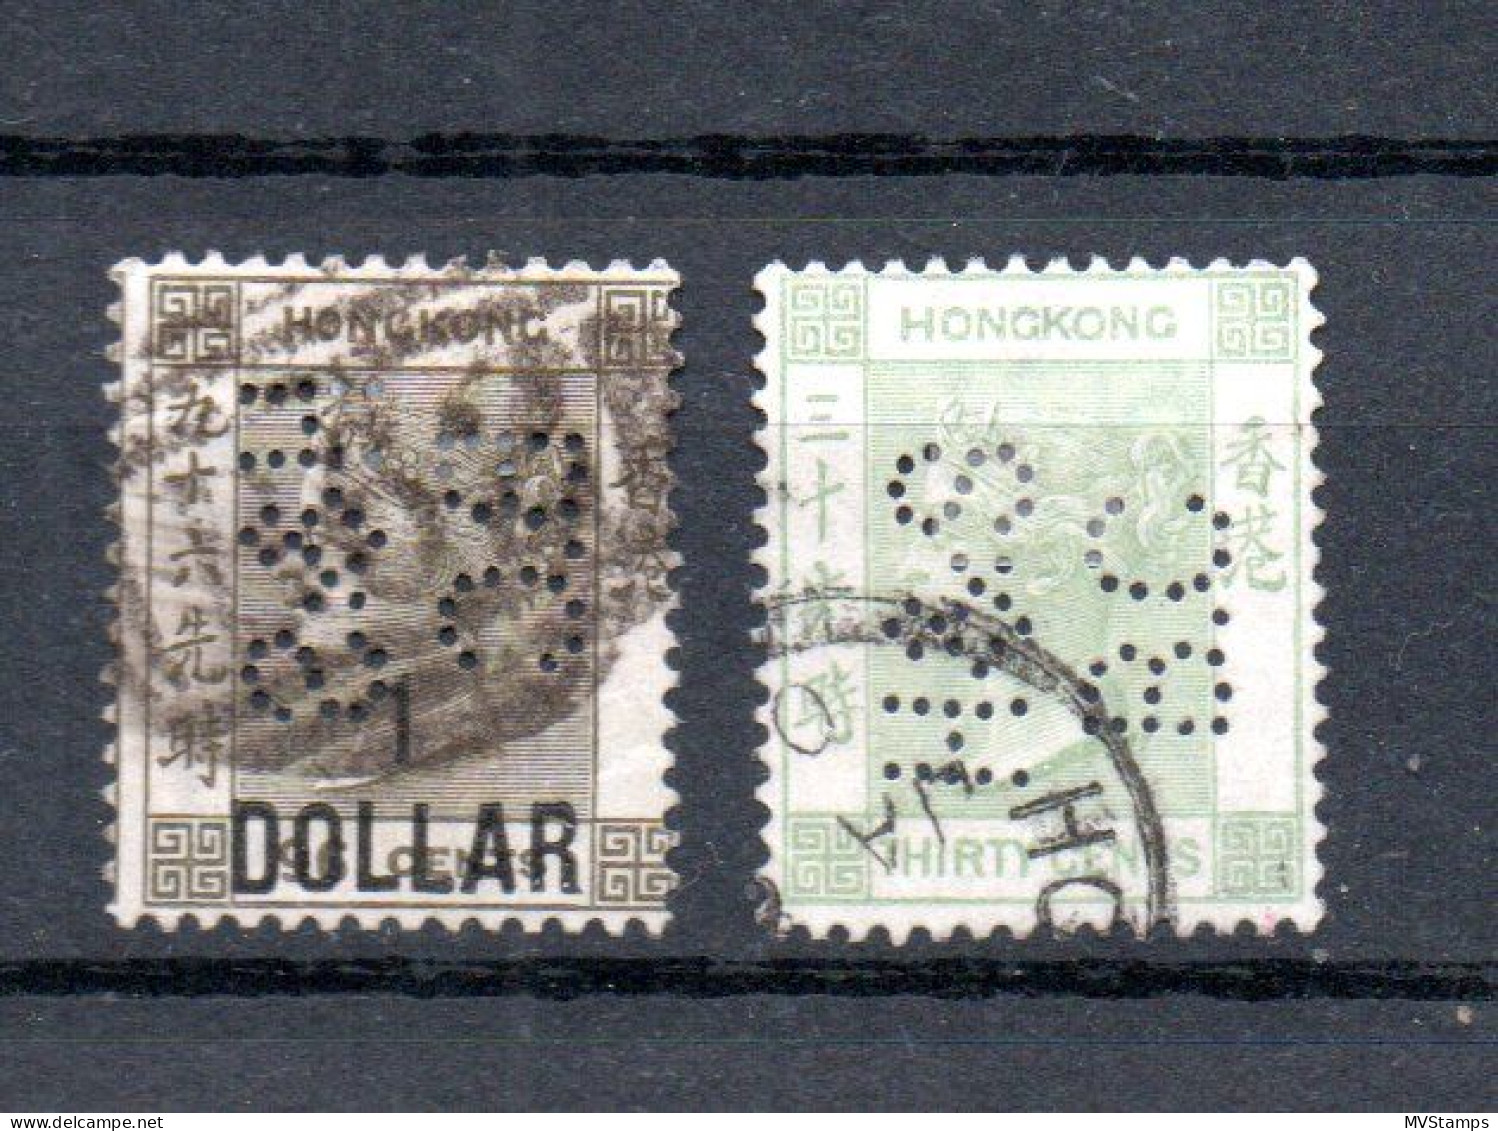 Hong Kong 1885/91 Old Def.Victoria Stamps With Perforation (HSBC) Nice Used - Oblitérés